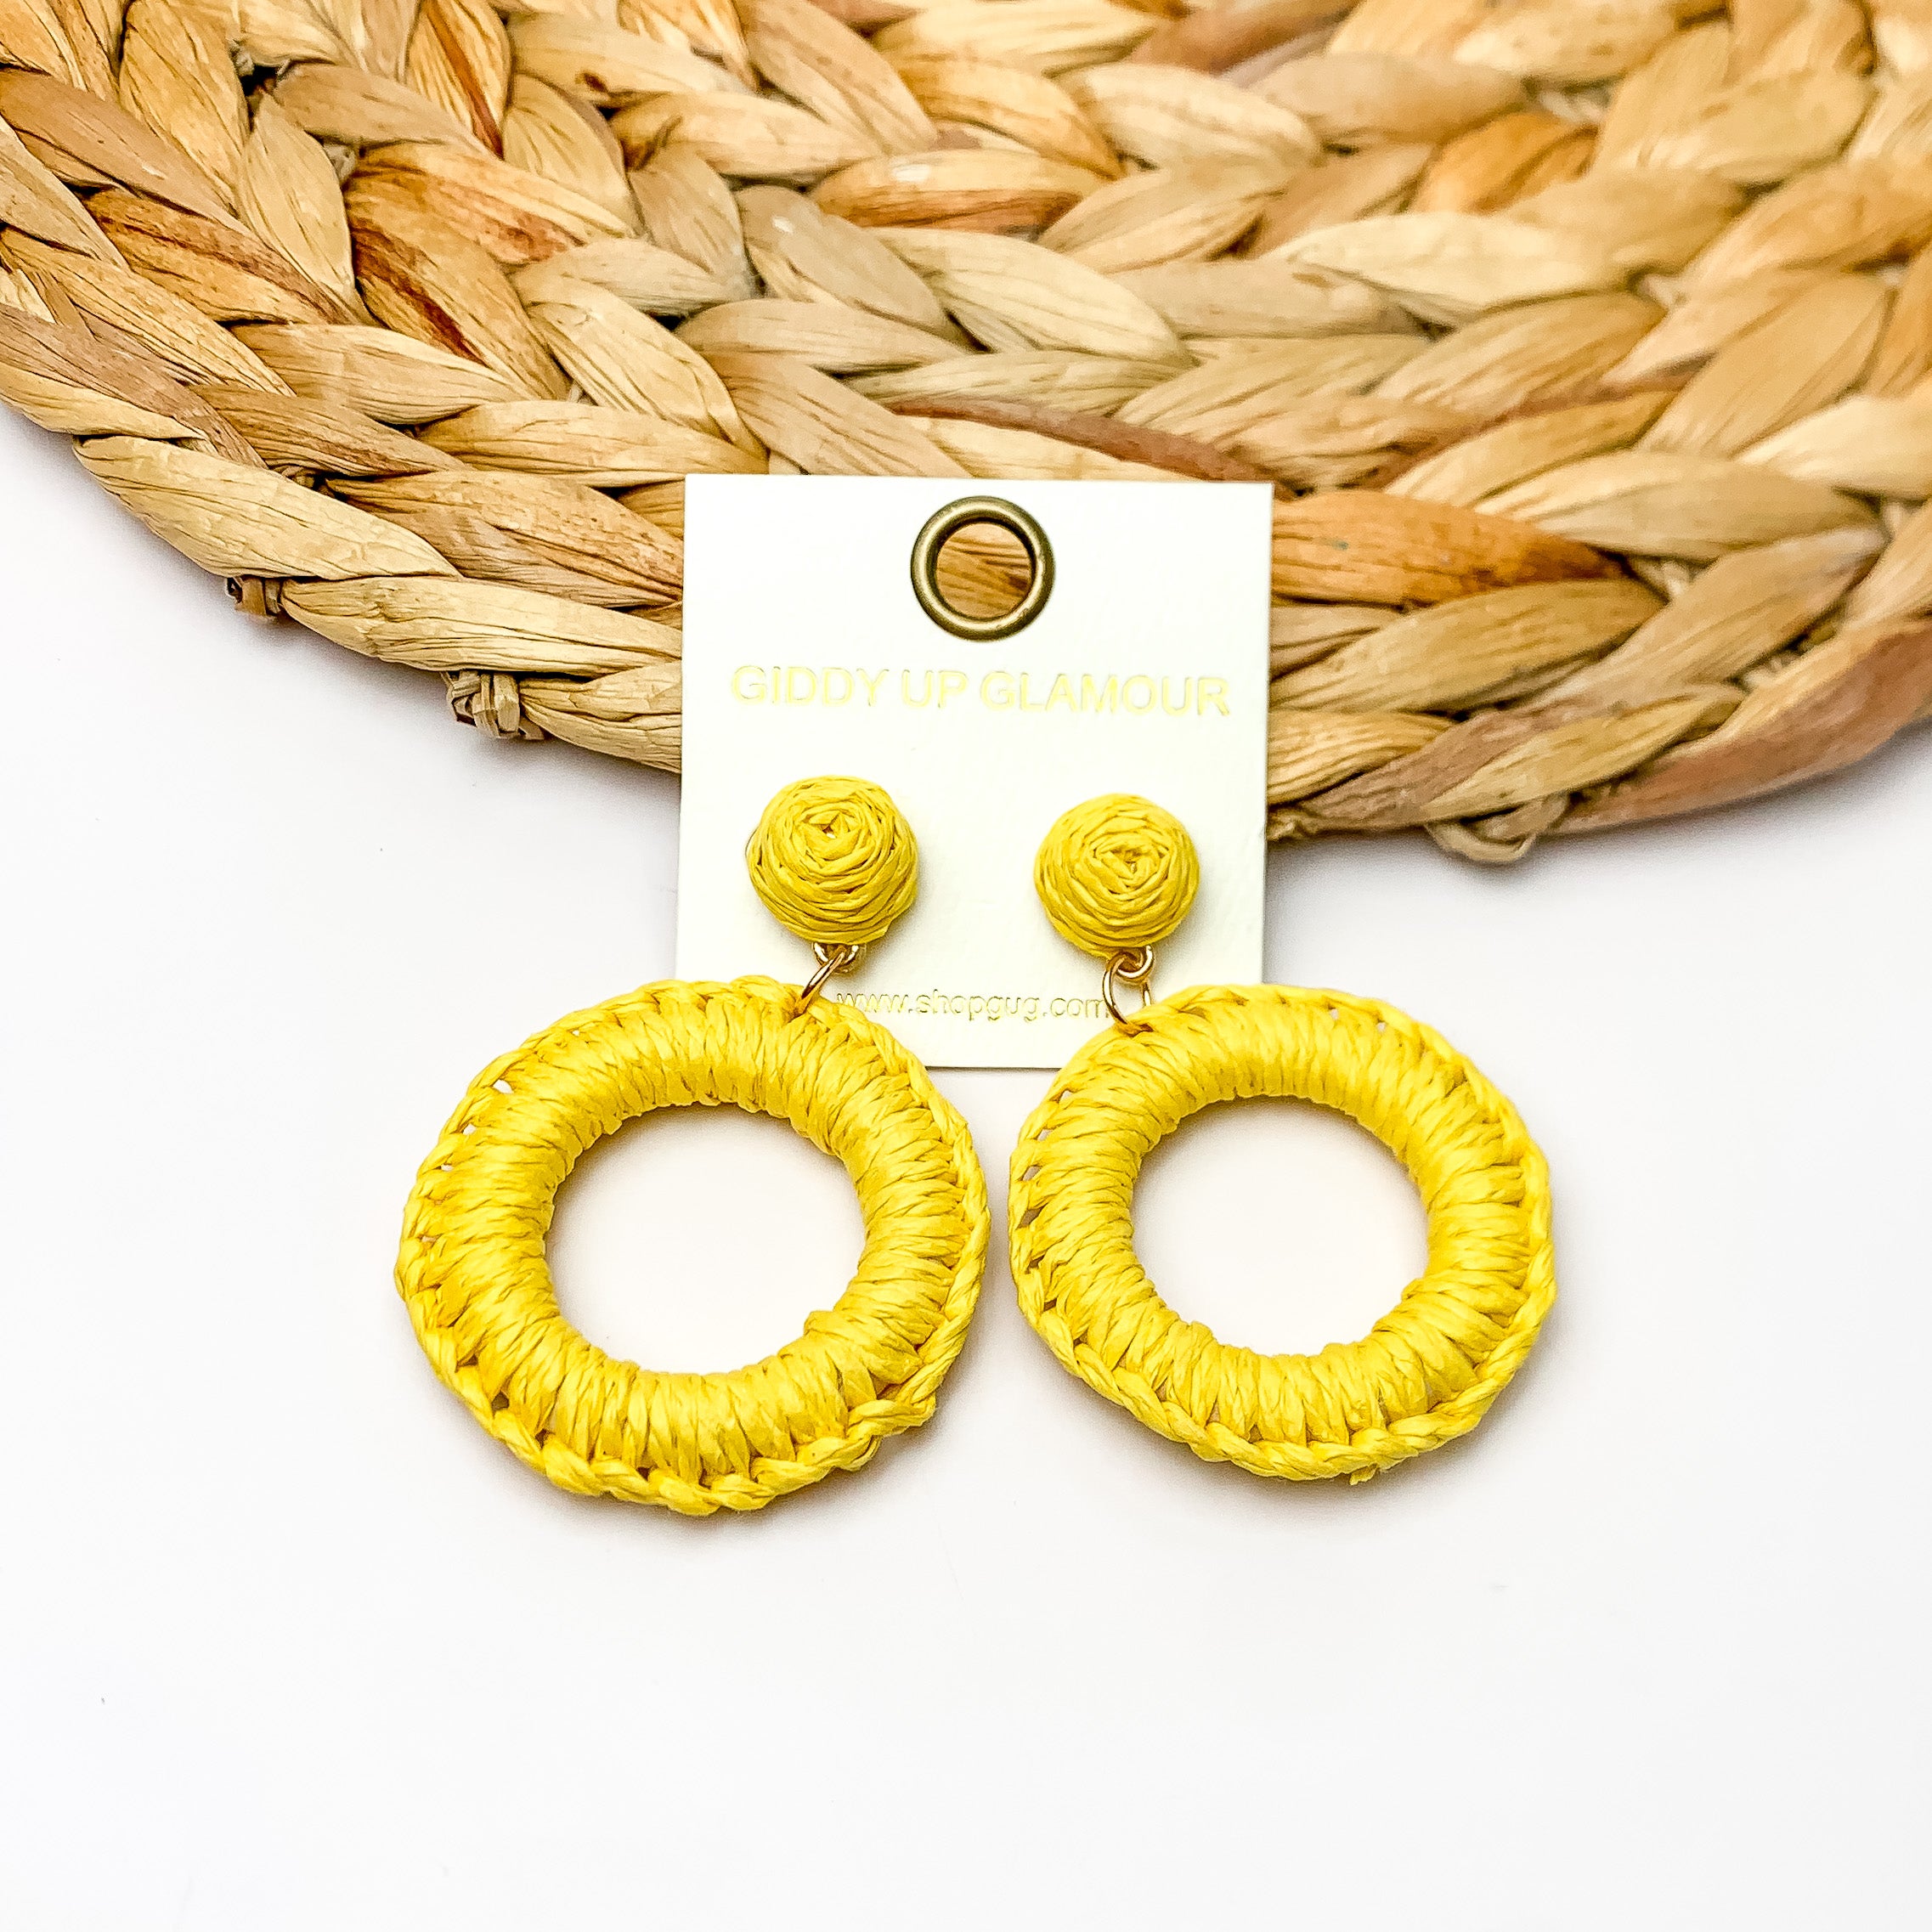 Beachside Café Raffia Wrapped Circle Earrings in Yellow. Pictured on a white background with the top of the earrings laying on a brown circle decorative piece.